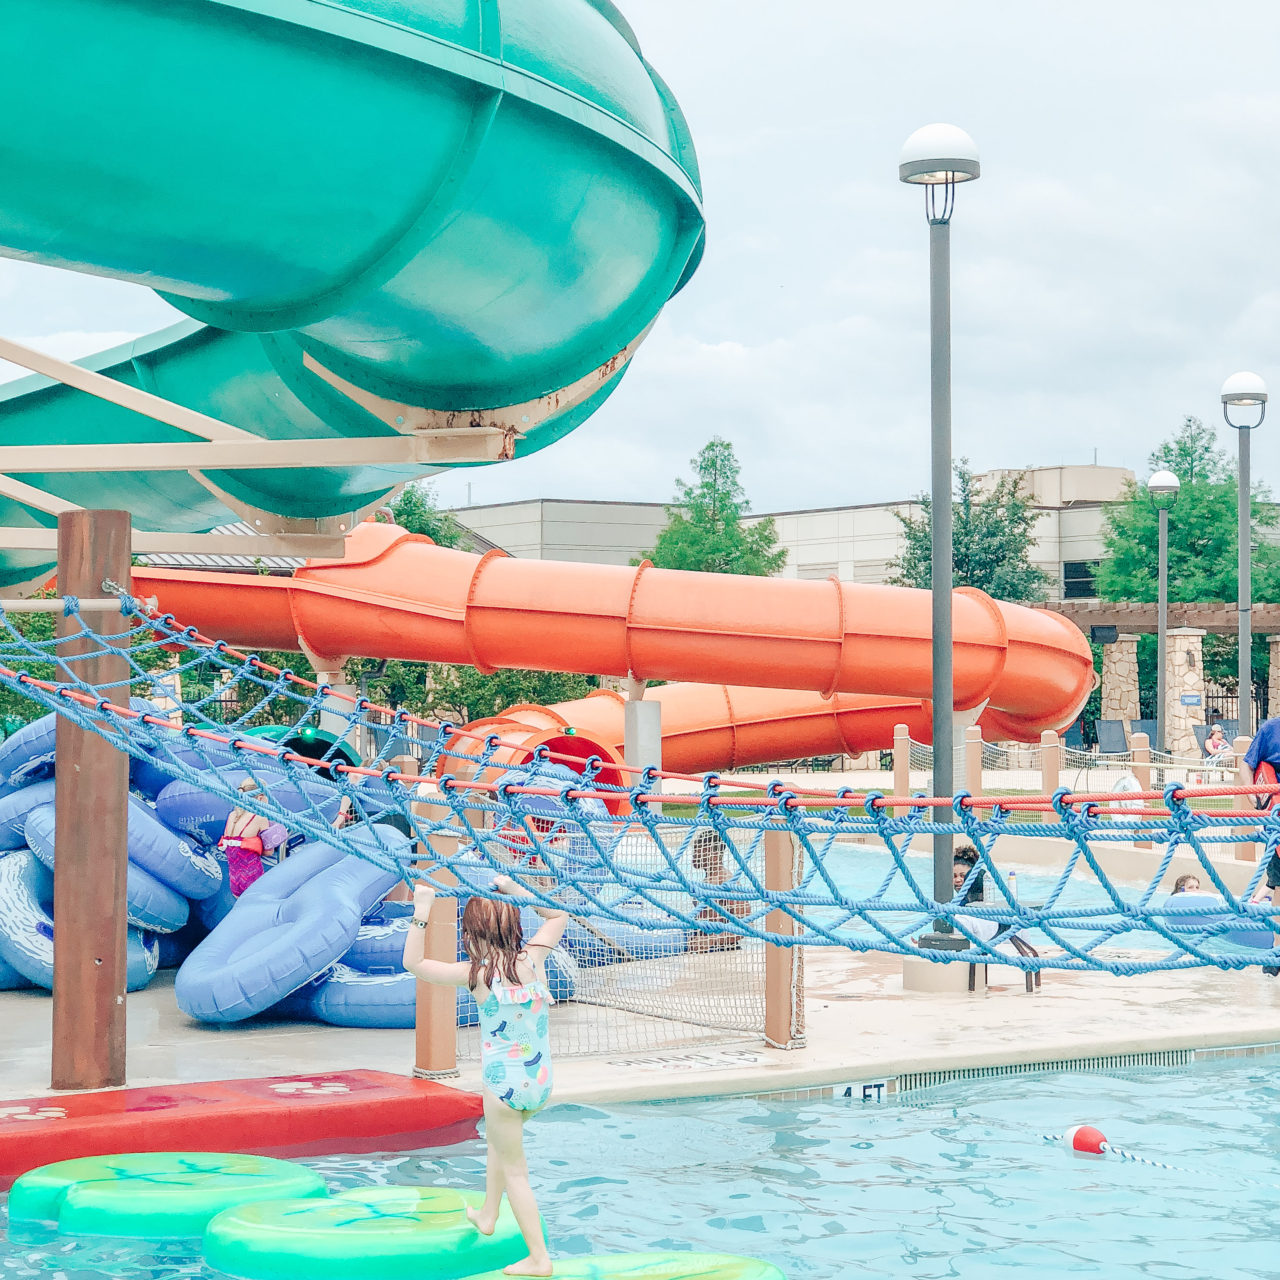 Tips for your Great Wolf Lodge Grapevine trip!